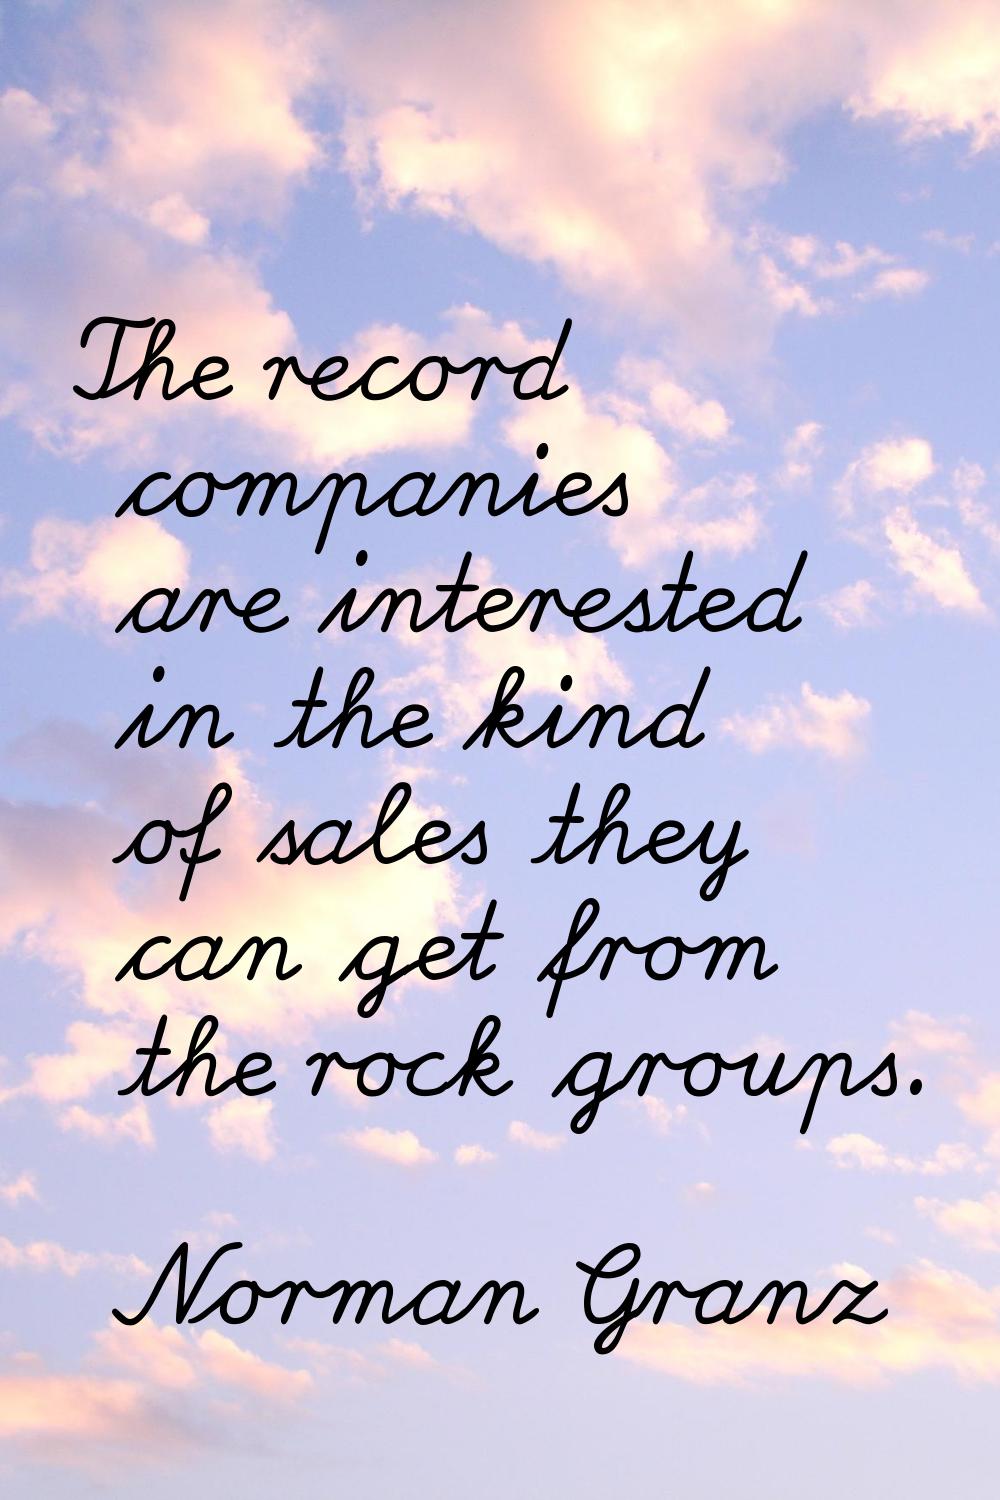 The record companies are interested in the kind of sales they can get from the rock groups.